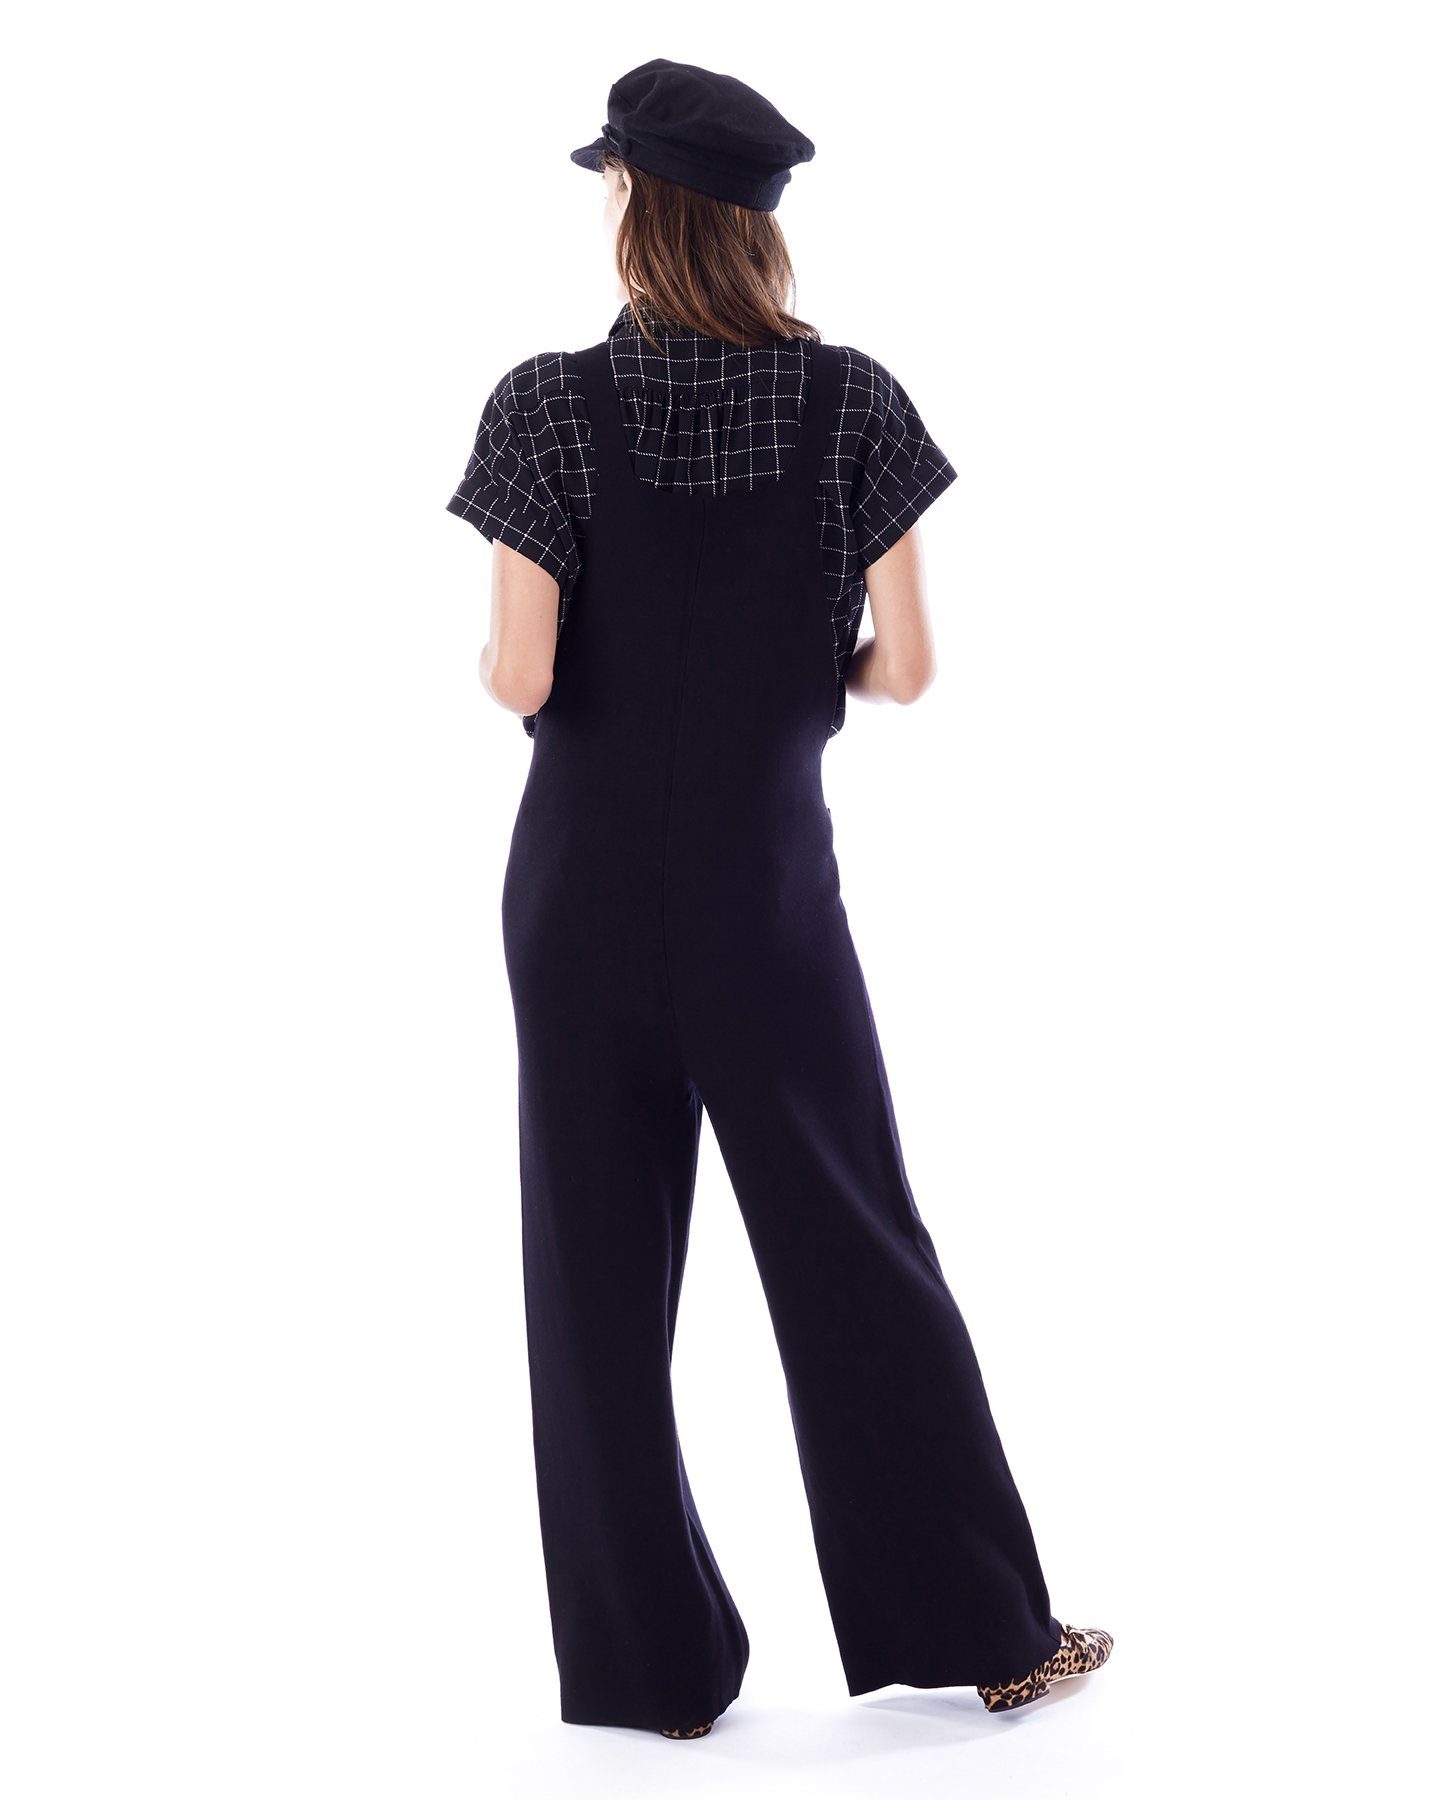 CANDICE- knit jumpsuit in black no zippers